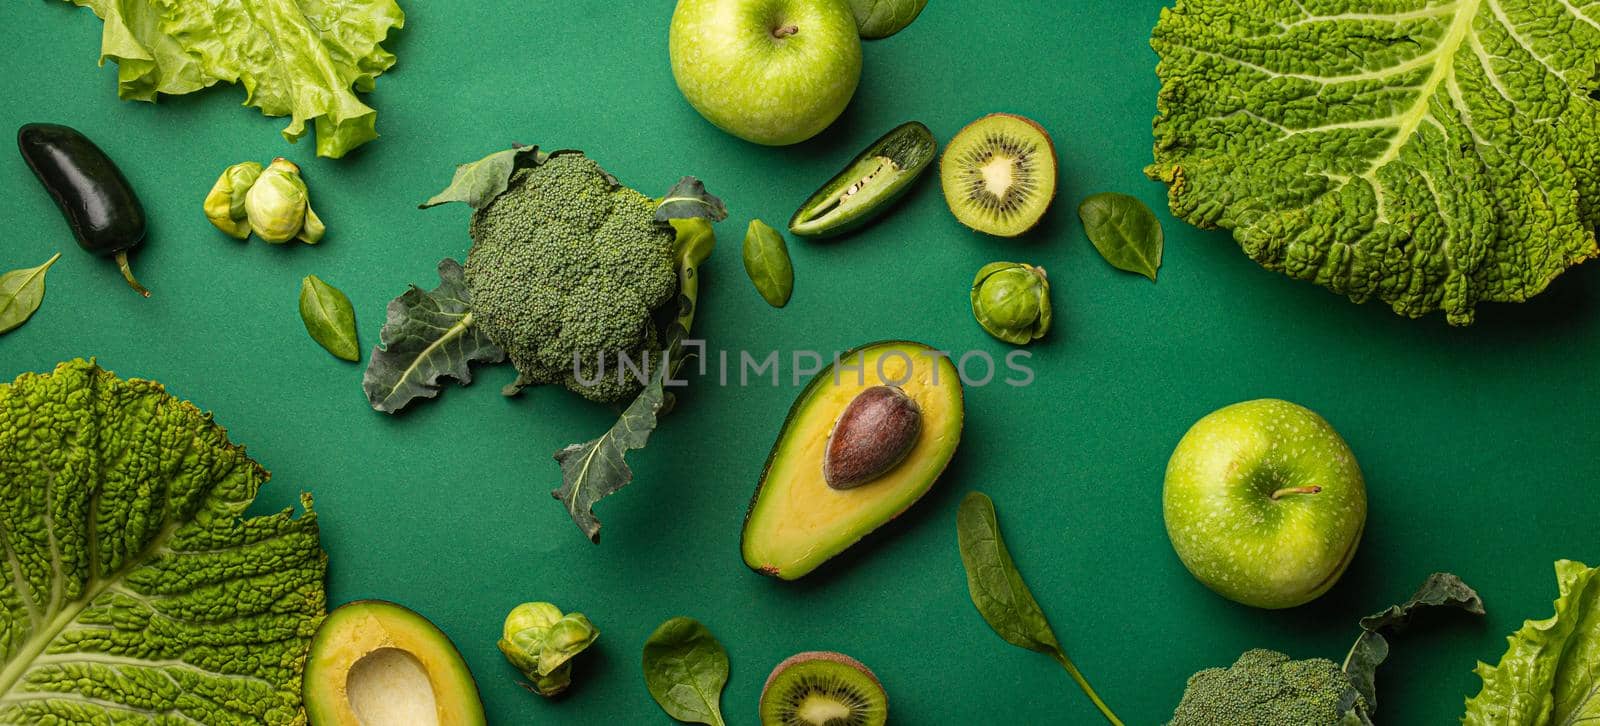 Creative layout healthy organic food concept made of green fruit and vegetables on green background flat lay: avocado, kale, broccoli, Brussels sprouts, kiwi, peppers, apple, cabbage top view.